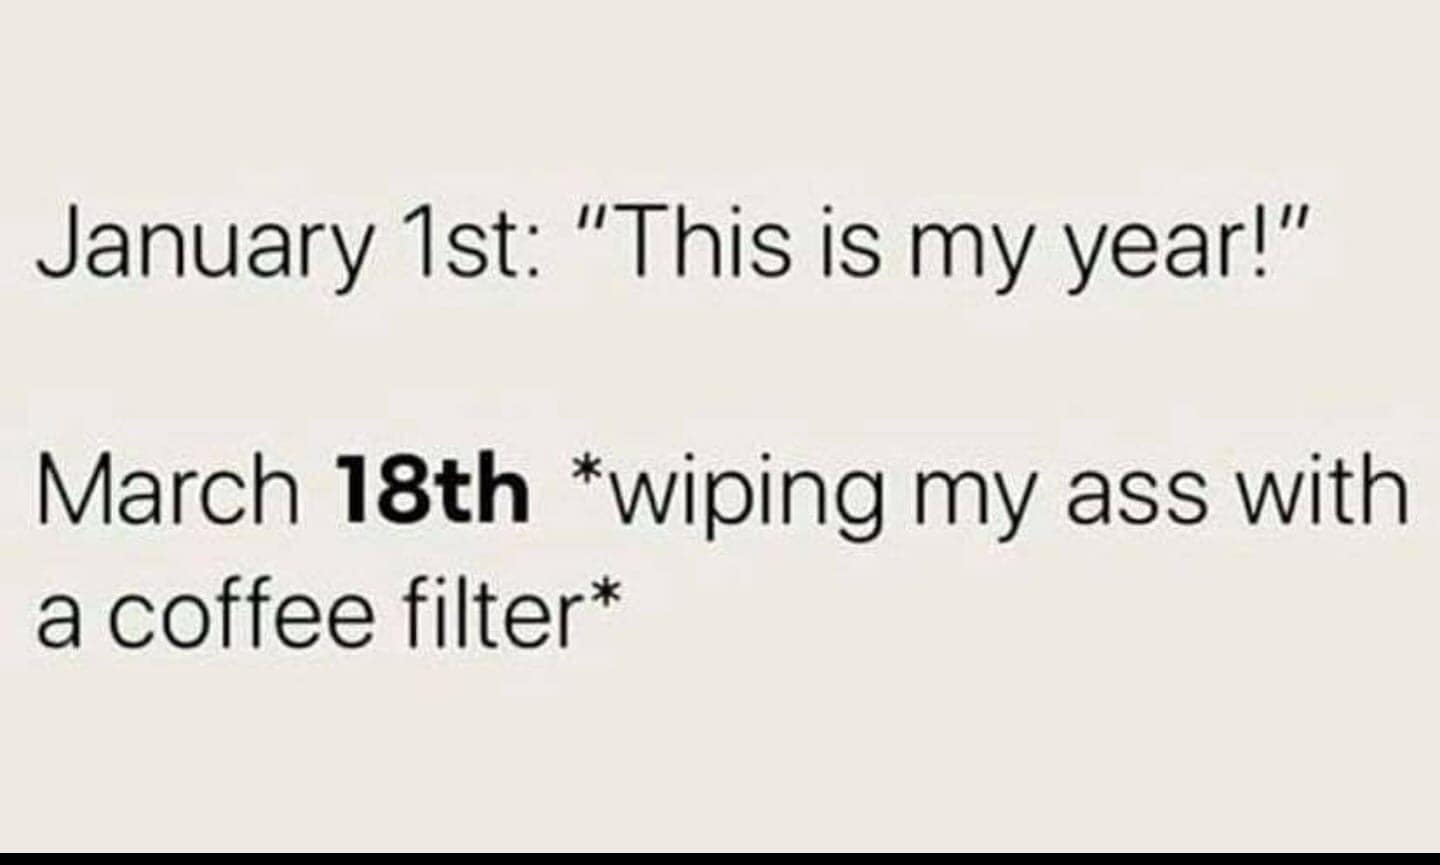 January 1st: "This is my year!" - March 18th: wiping my ass with a coffee filter